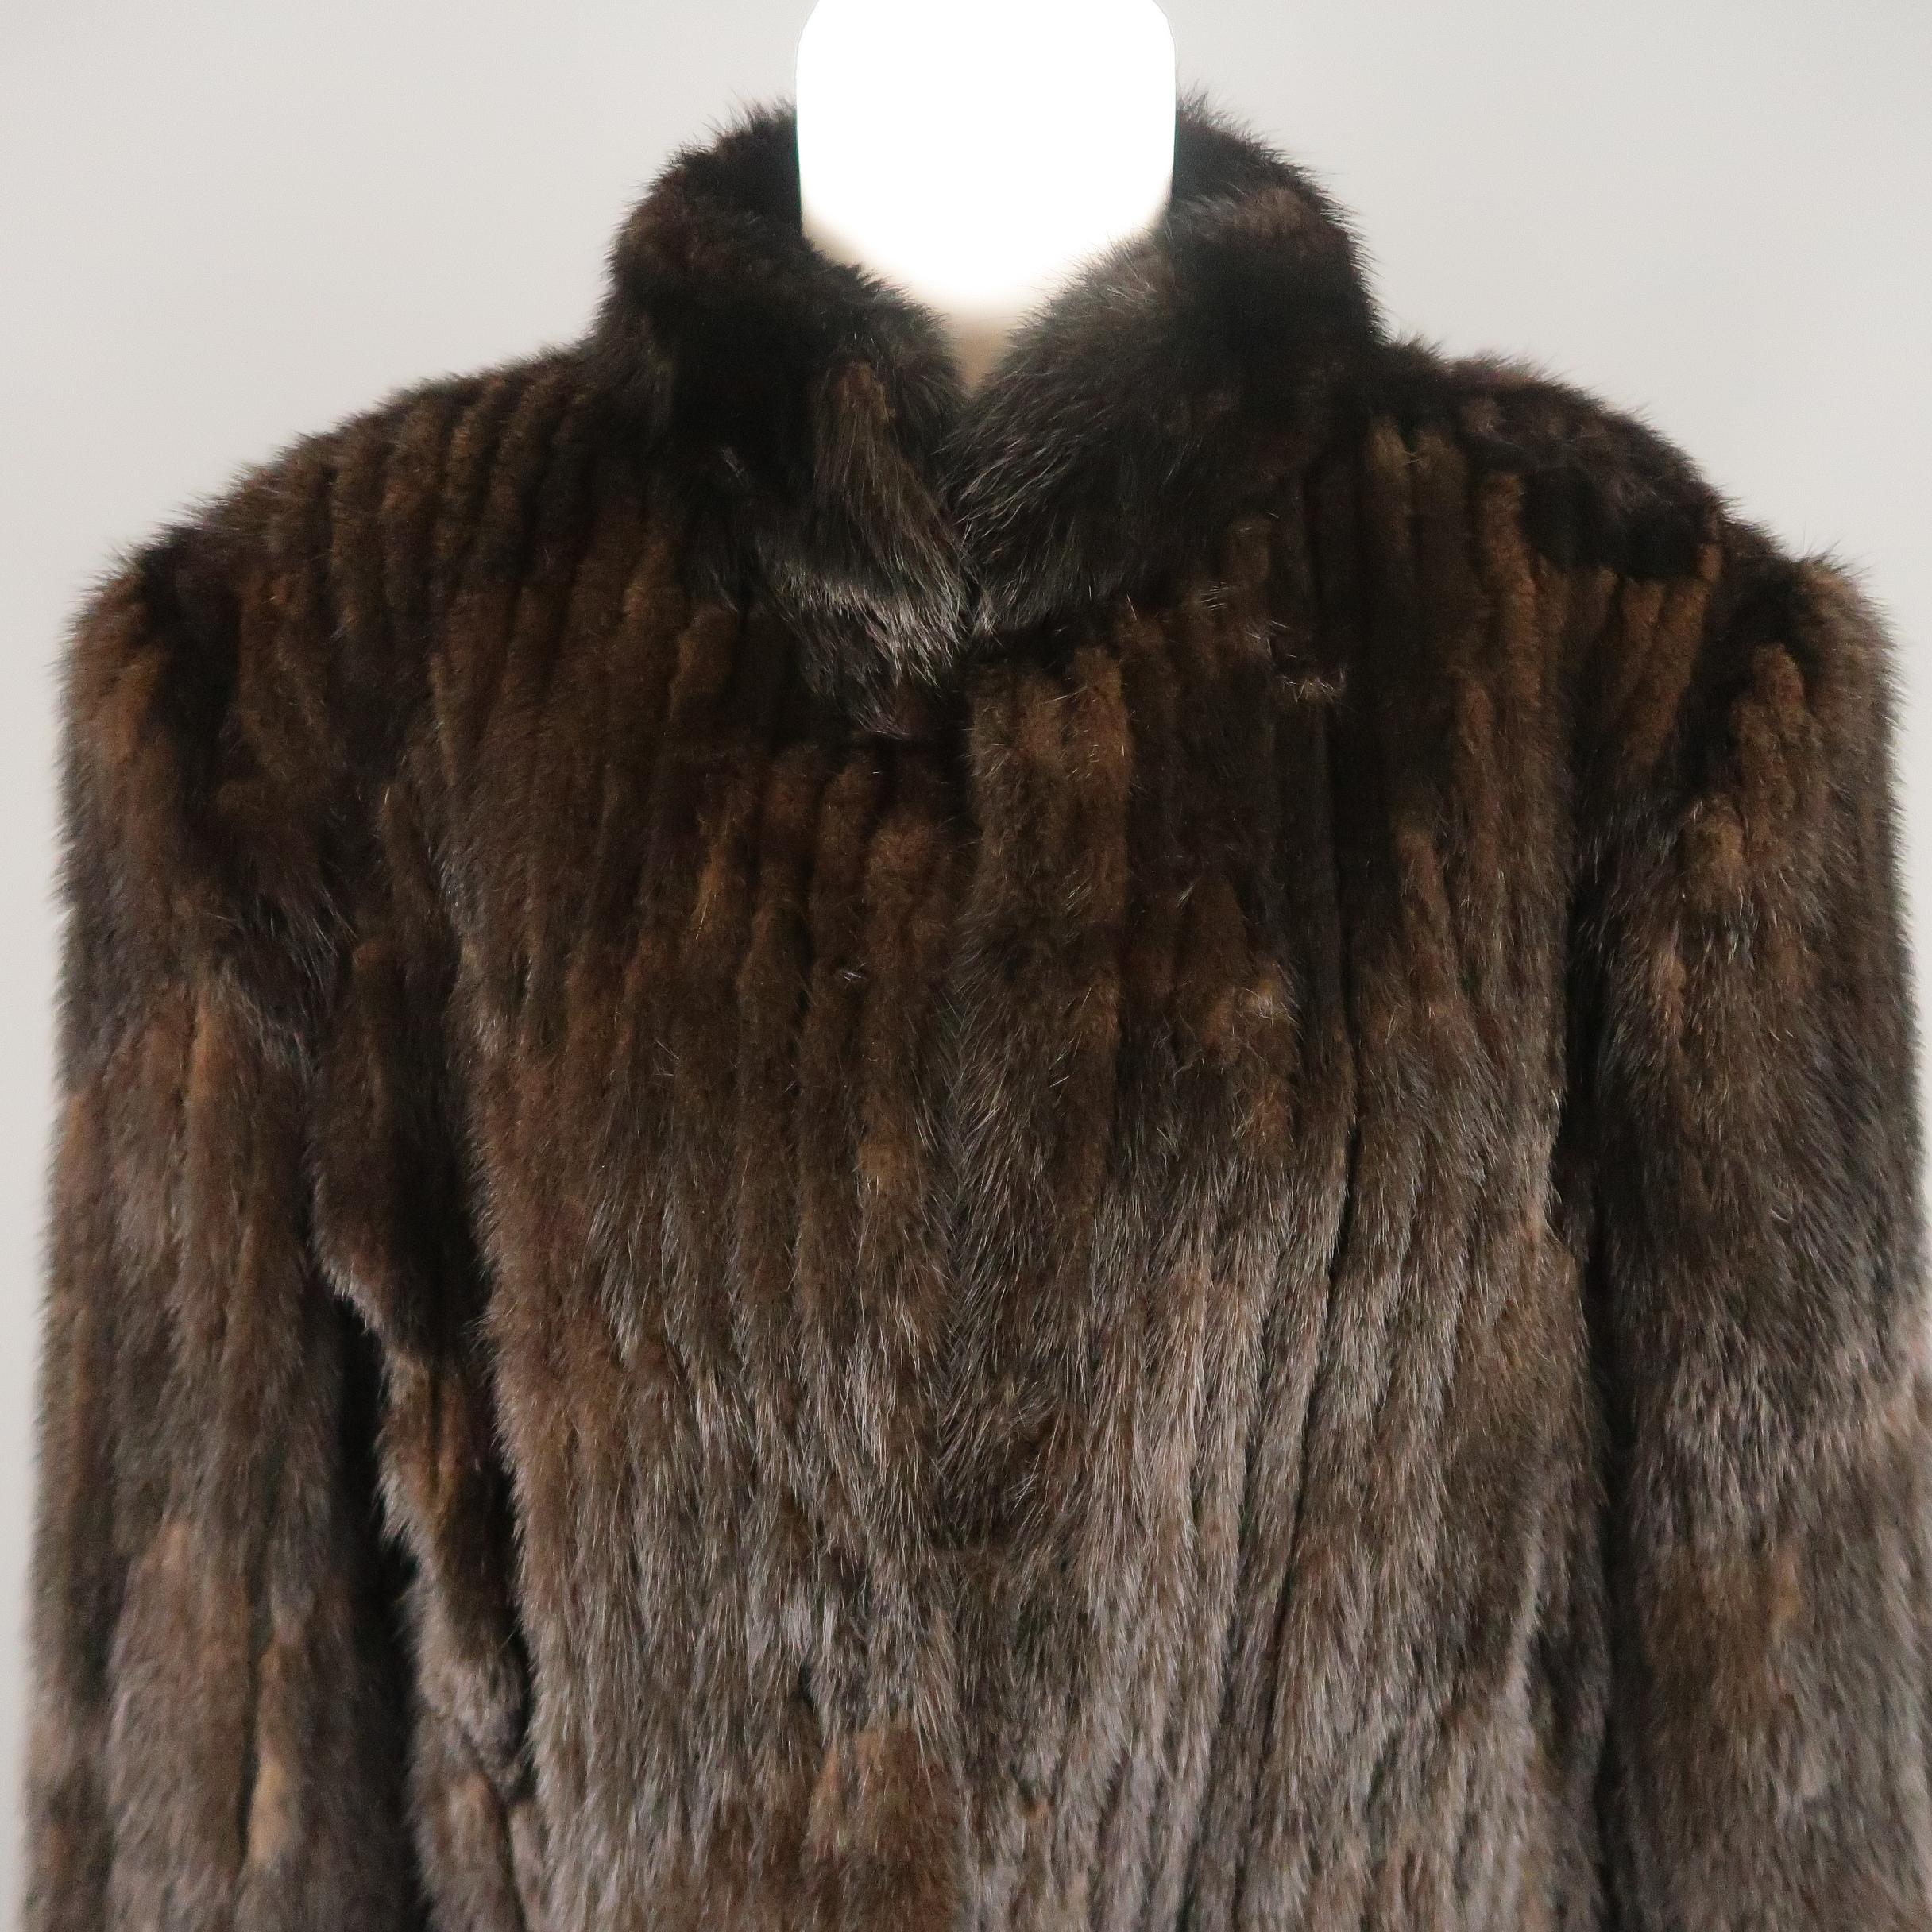 Vintage SAGA jacket comes in stripe textured mink fur with a stand up collar and hook eye closures.
 
Good Pre-Owned Condition.
Marked: L
 
Measurements:
 
Shoulder: 20 in.
Bust: 44 in.
Sleeve: 22 in.
Length: 26 in.
